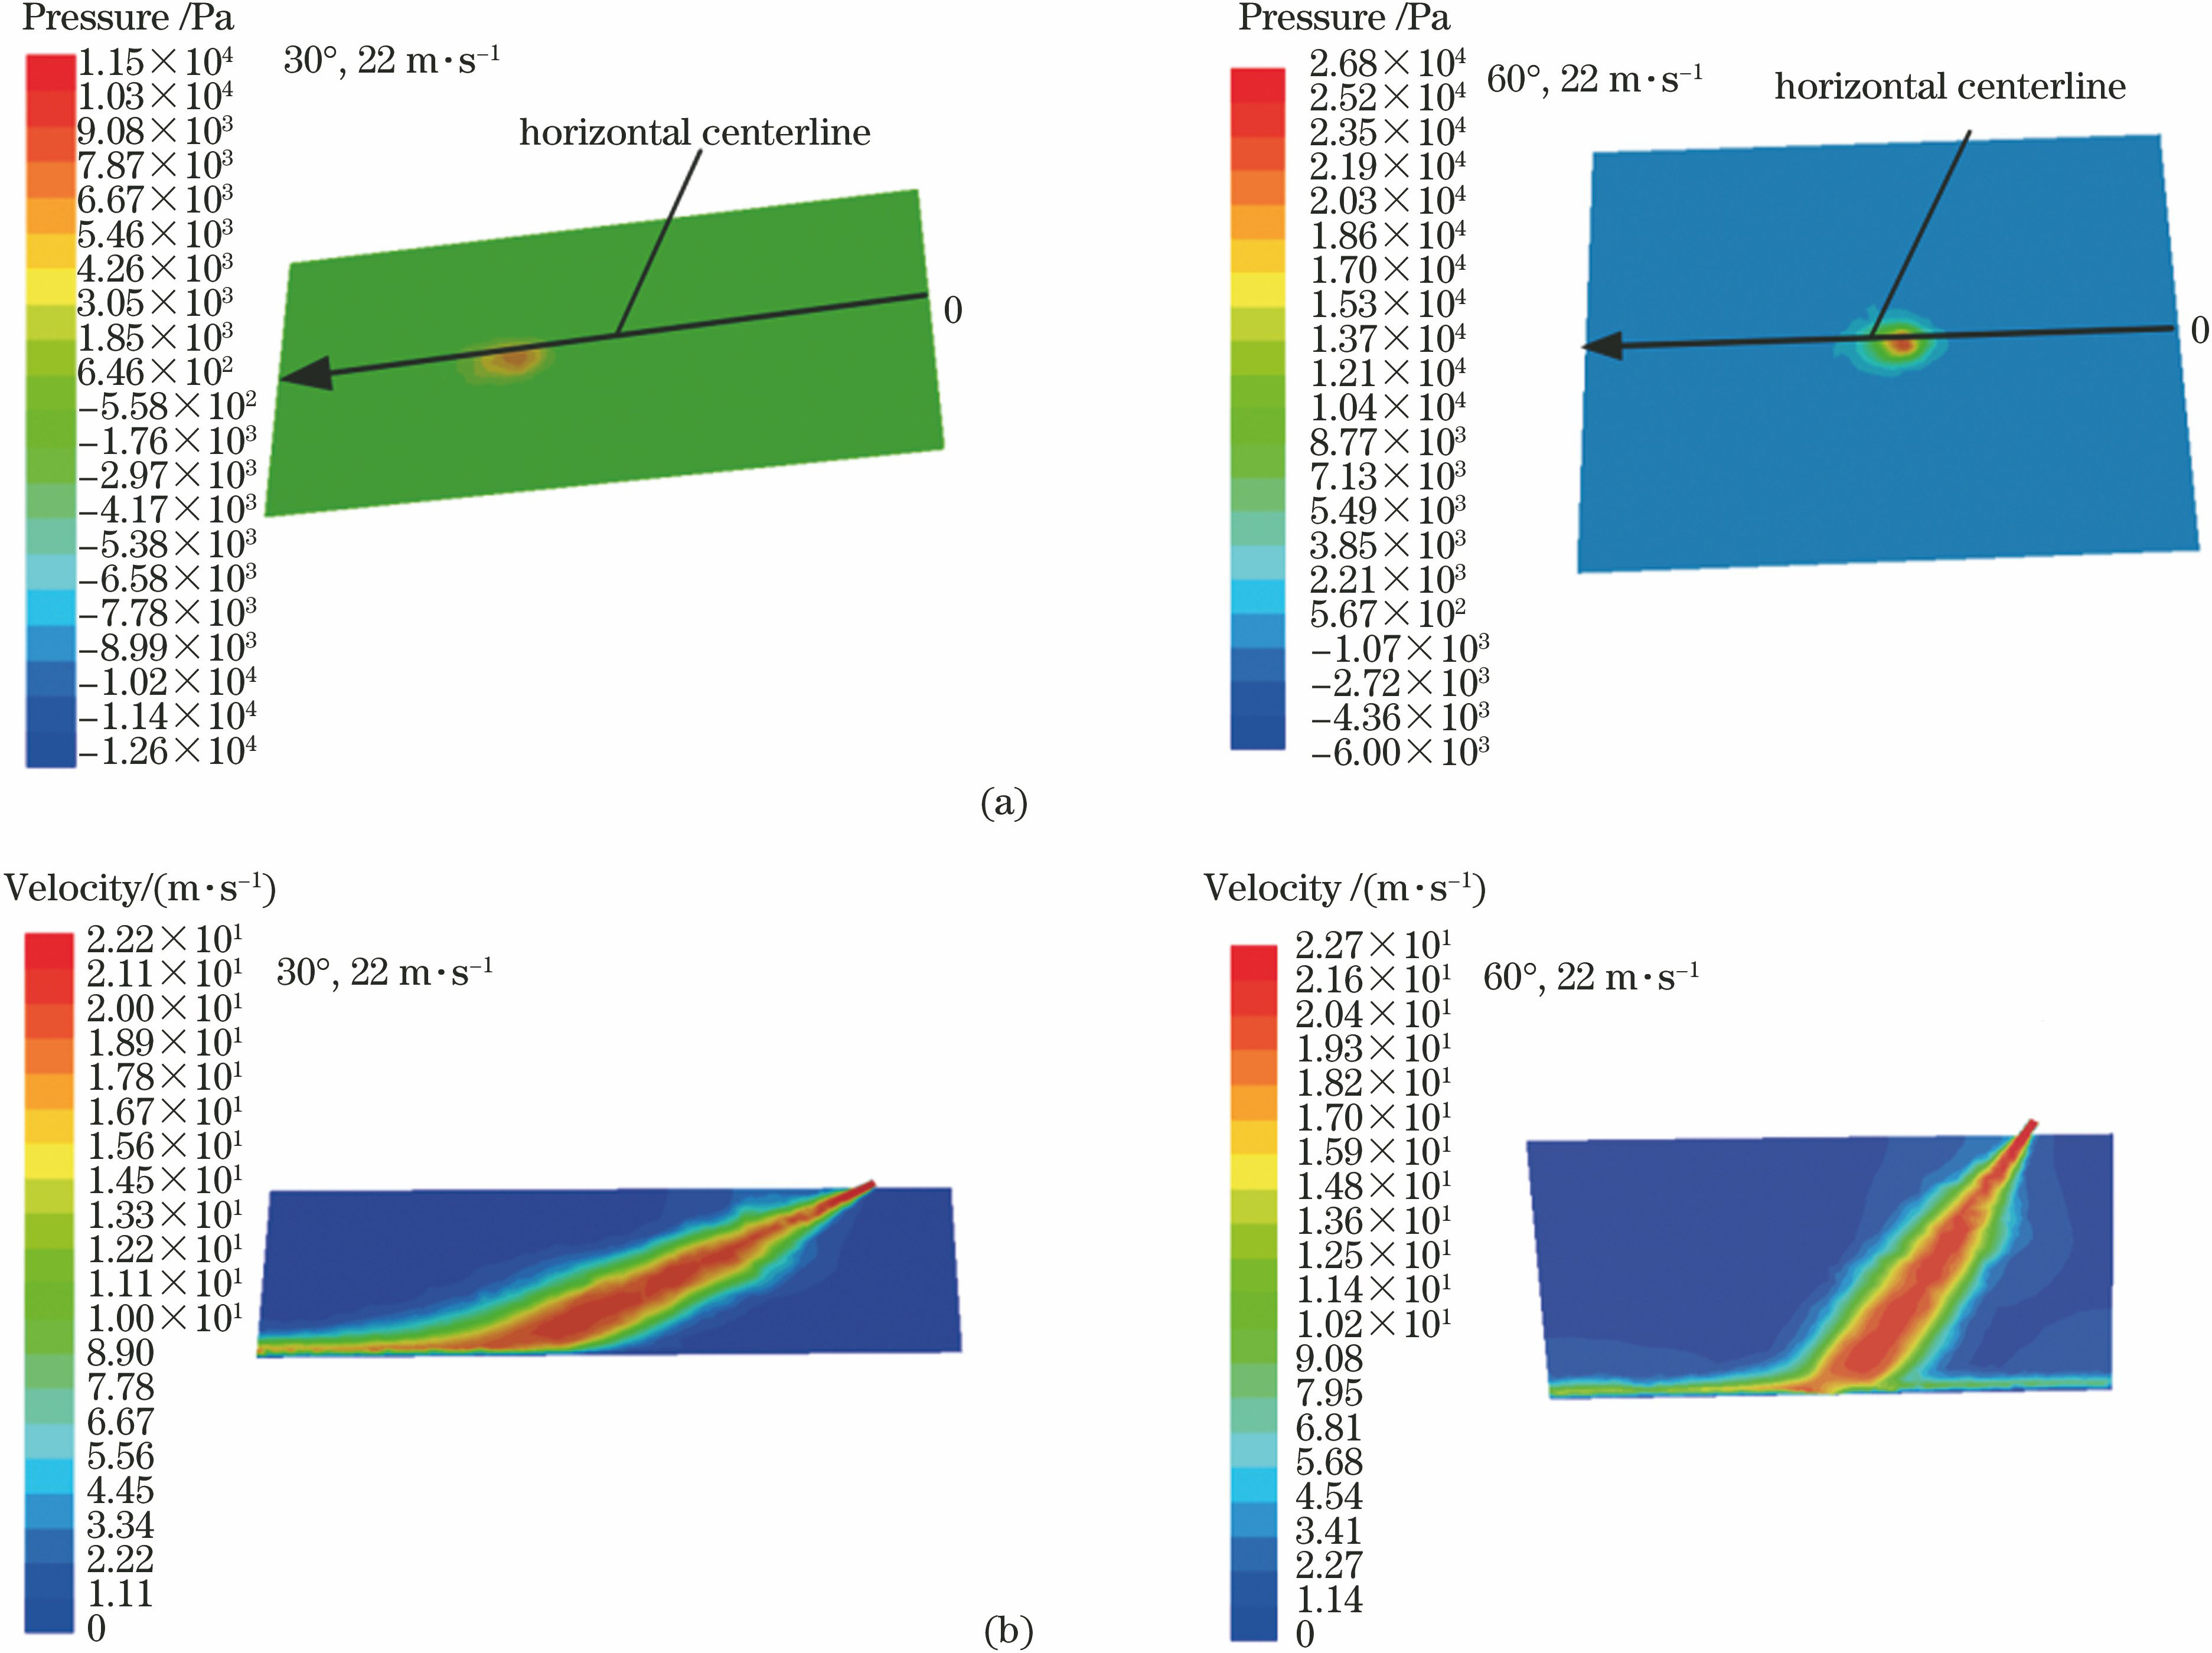 Distribution cloud diagrams of (a) pressure and (b) velocity at 30° and 60° jet incidence angles and 22 m·s-1 velocity